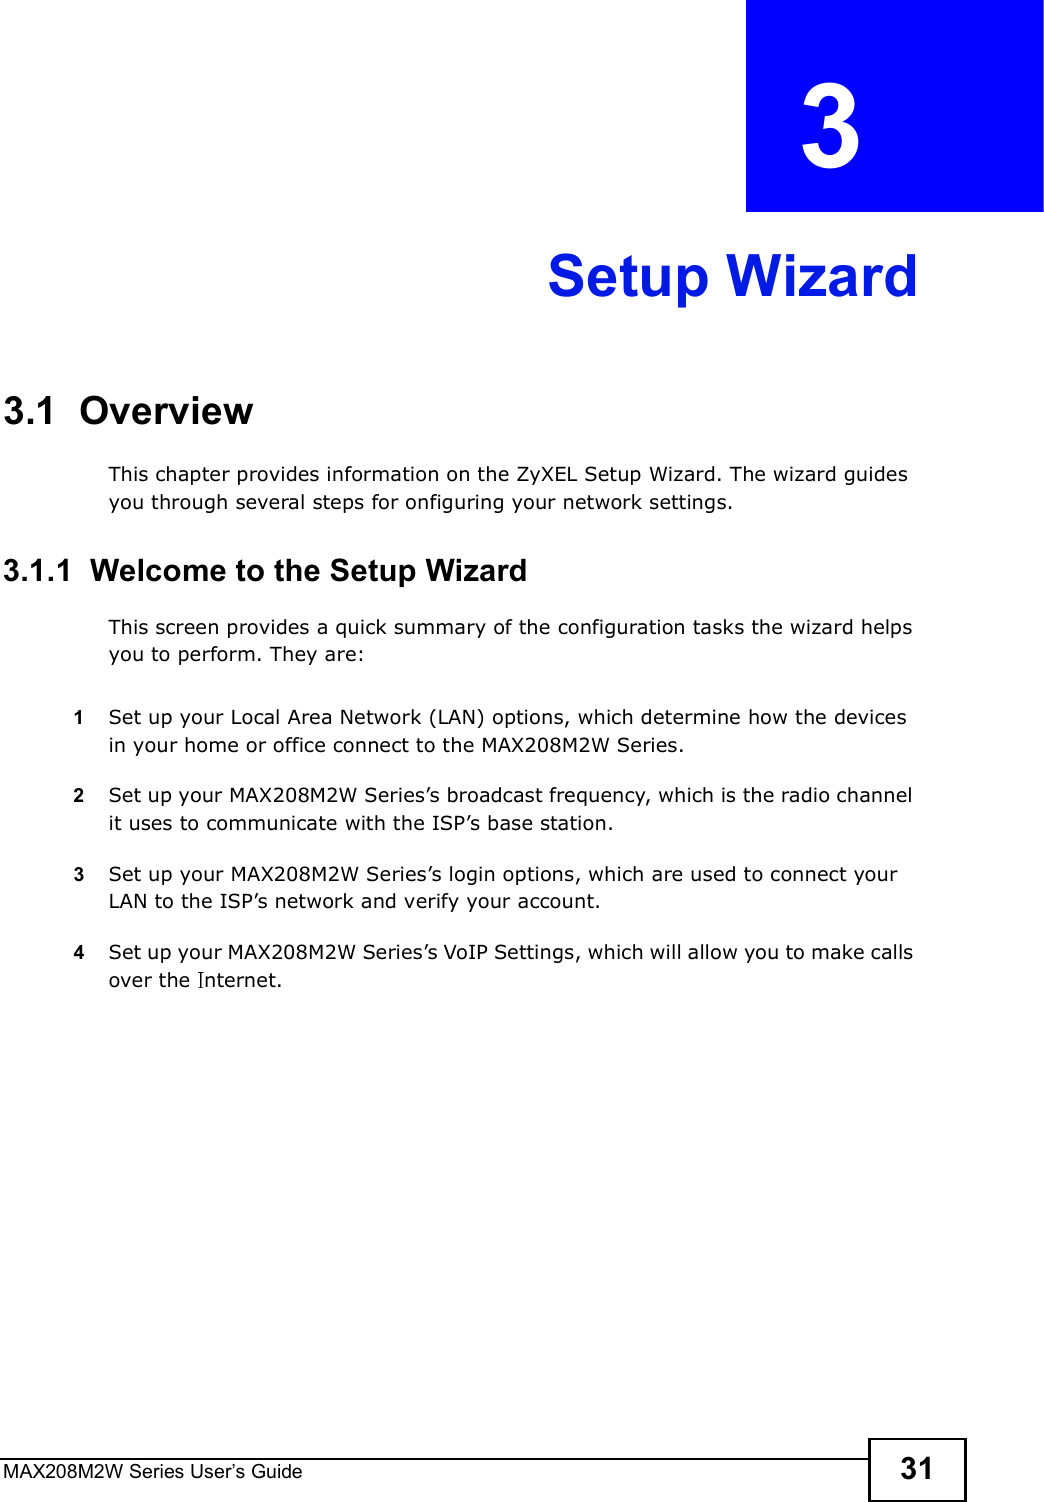 MAX208M2W Series User s Guide 31CHAPTER  3 Setup Wizard3.1  OverviewThis chapter provides information on the ZyXEL Setup Wizard. The wizard guides you through several steps for onfiguring your network settings.3.1.1  Welcome to the Setup WizardThis screen provides a quick summary of the configuration tasks the wizard helps you to perform. They are:1Set up your Local Area Network (LAN) options, which determine how the devices in your home or office connect to the MAX208M2W Series.2Set up your MAX208M2W Series s broadcast frequency, which is the radio channel it uses to communicate with the ISP s base station.3Set up your MAX208M2W Series s login options, which are used to connect your LAN to the ISP s network and verify your account. 4Set up your MAX208M2W Series s VoIP Settings, which will allow you to make calls over the  nternet.